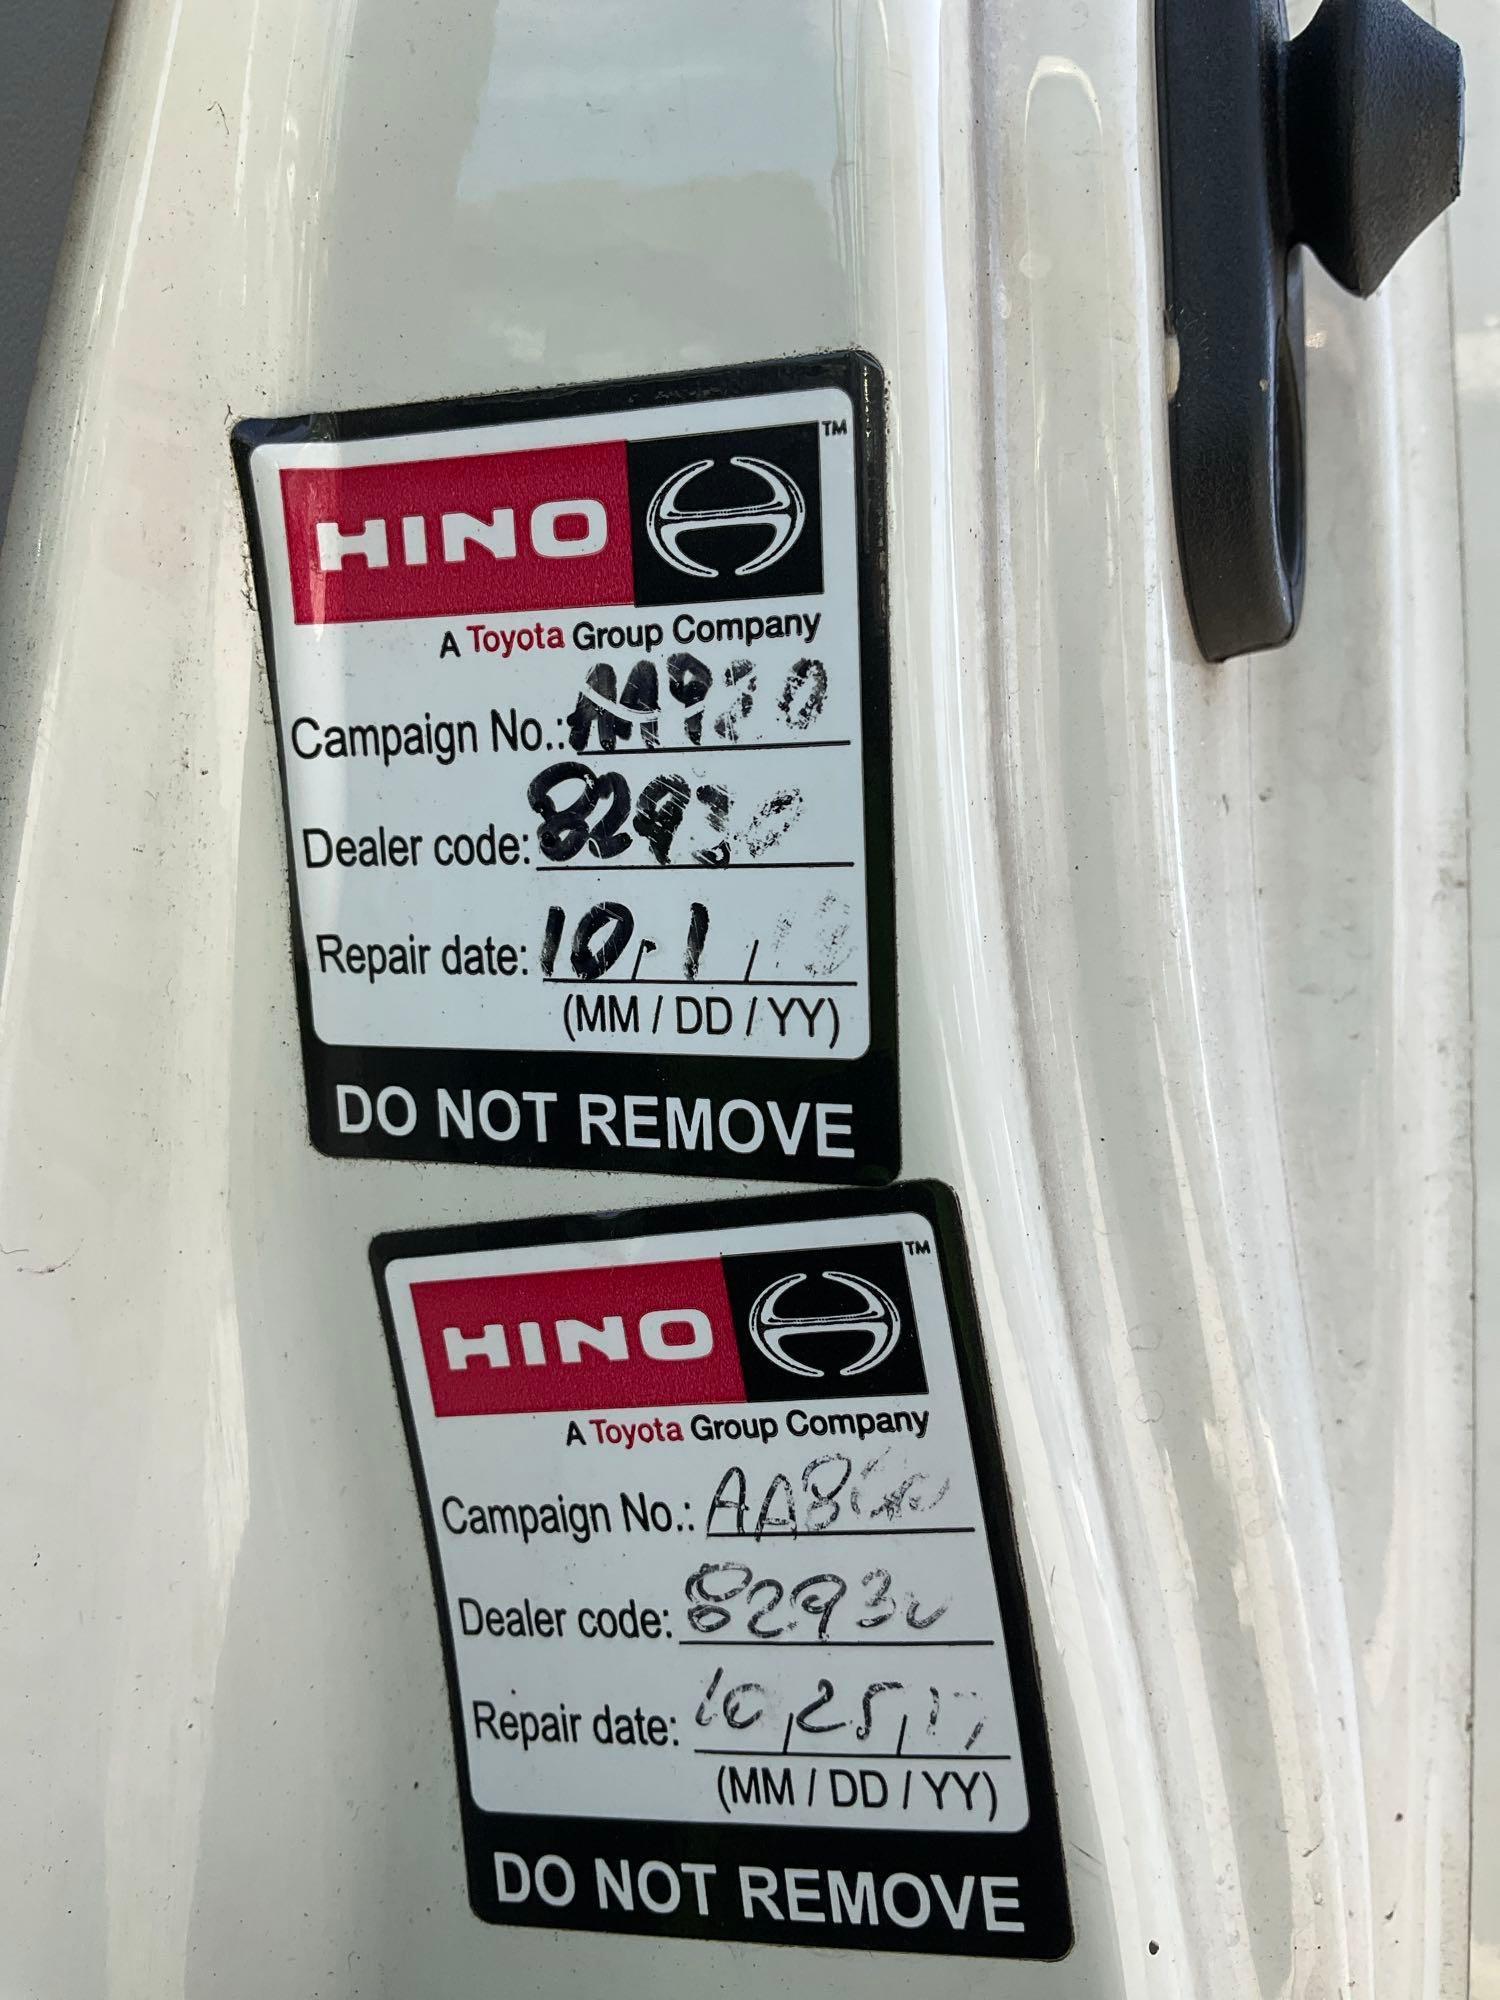 2017 HINO 740 BOX TRUCK, DIESEL , APPROX GVWR 17,950 LBS, BOX BODY APPROX 18FT, ETRACKS, BACK UP ...